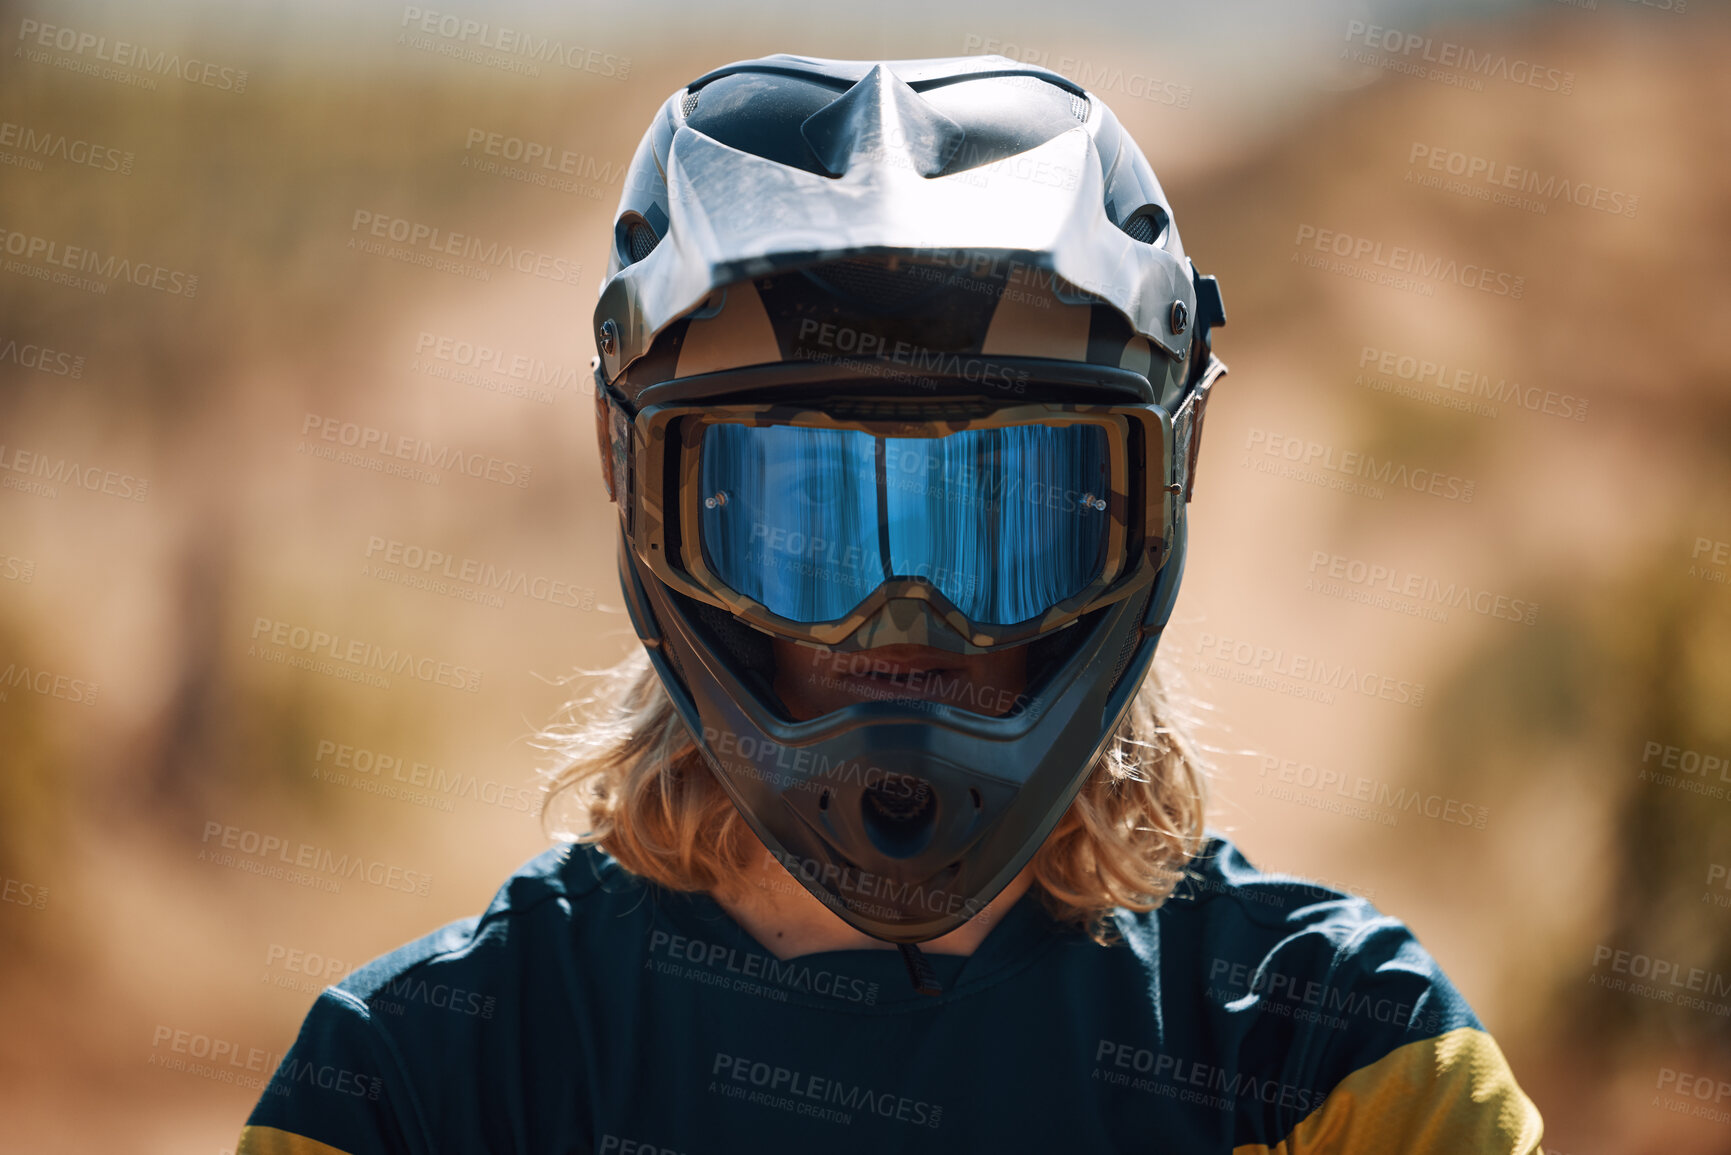 Buy stock photo Sports, motorcross and portrait of man with helmet for dirt racing, mountain biking and training. Adventure, cycling and headshot of biker on dirt road with neon visor safety gear, ready for action